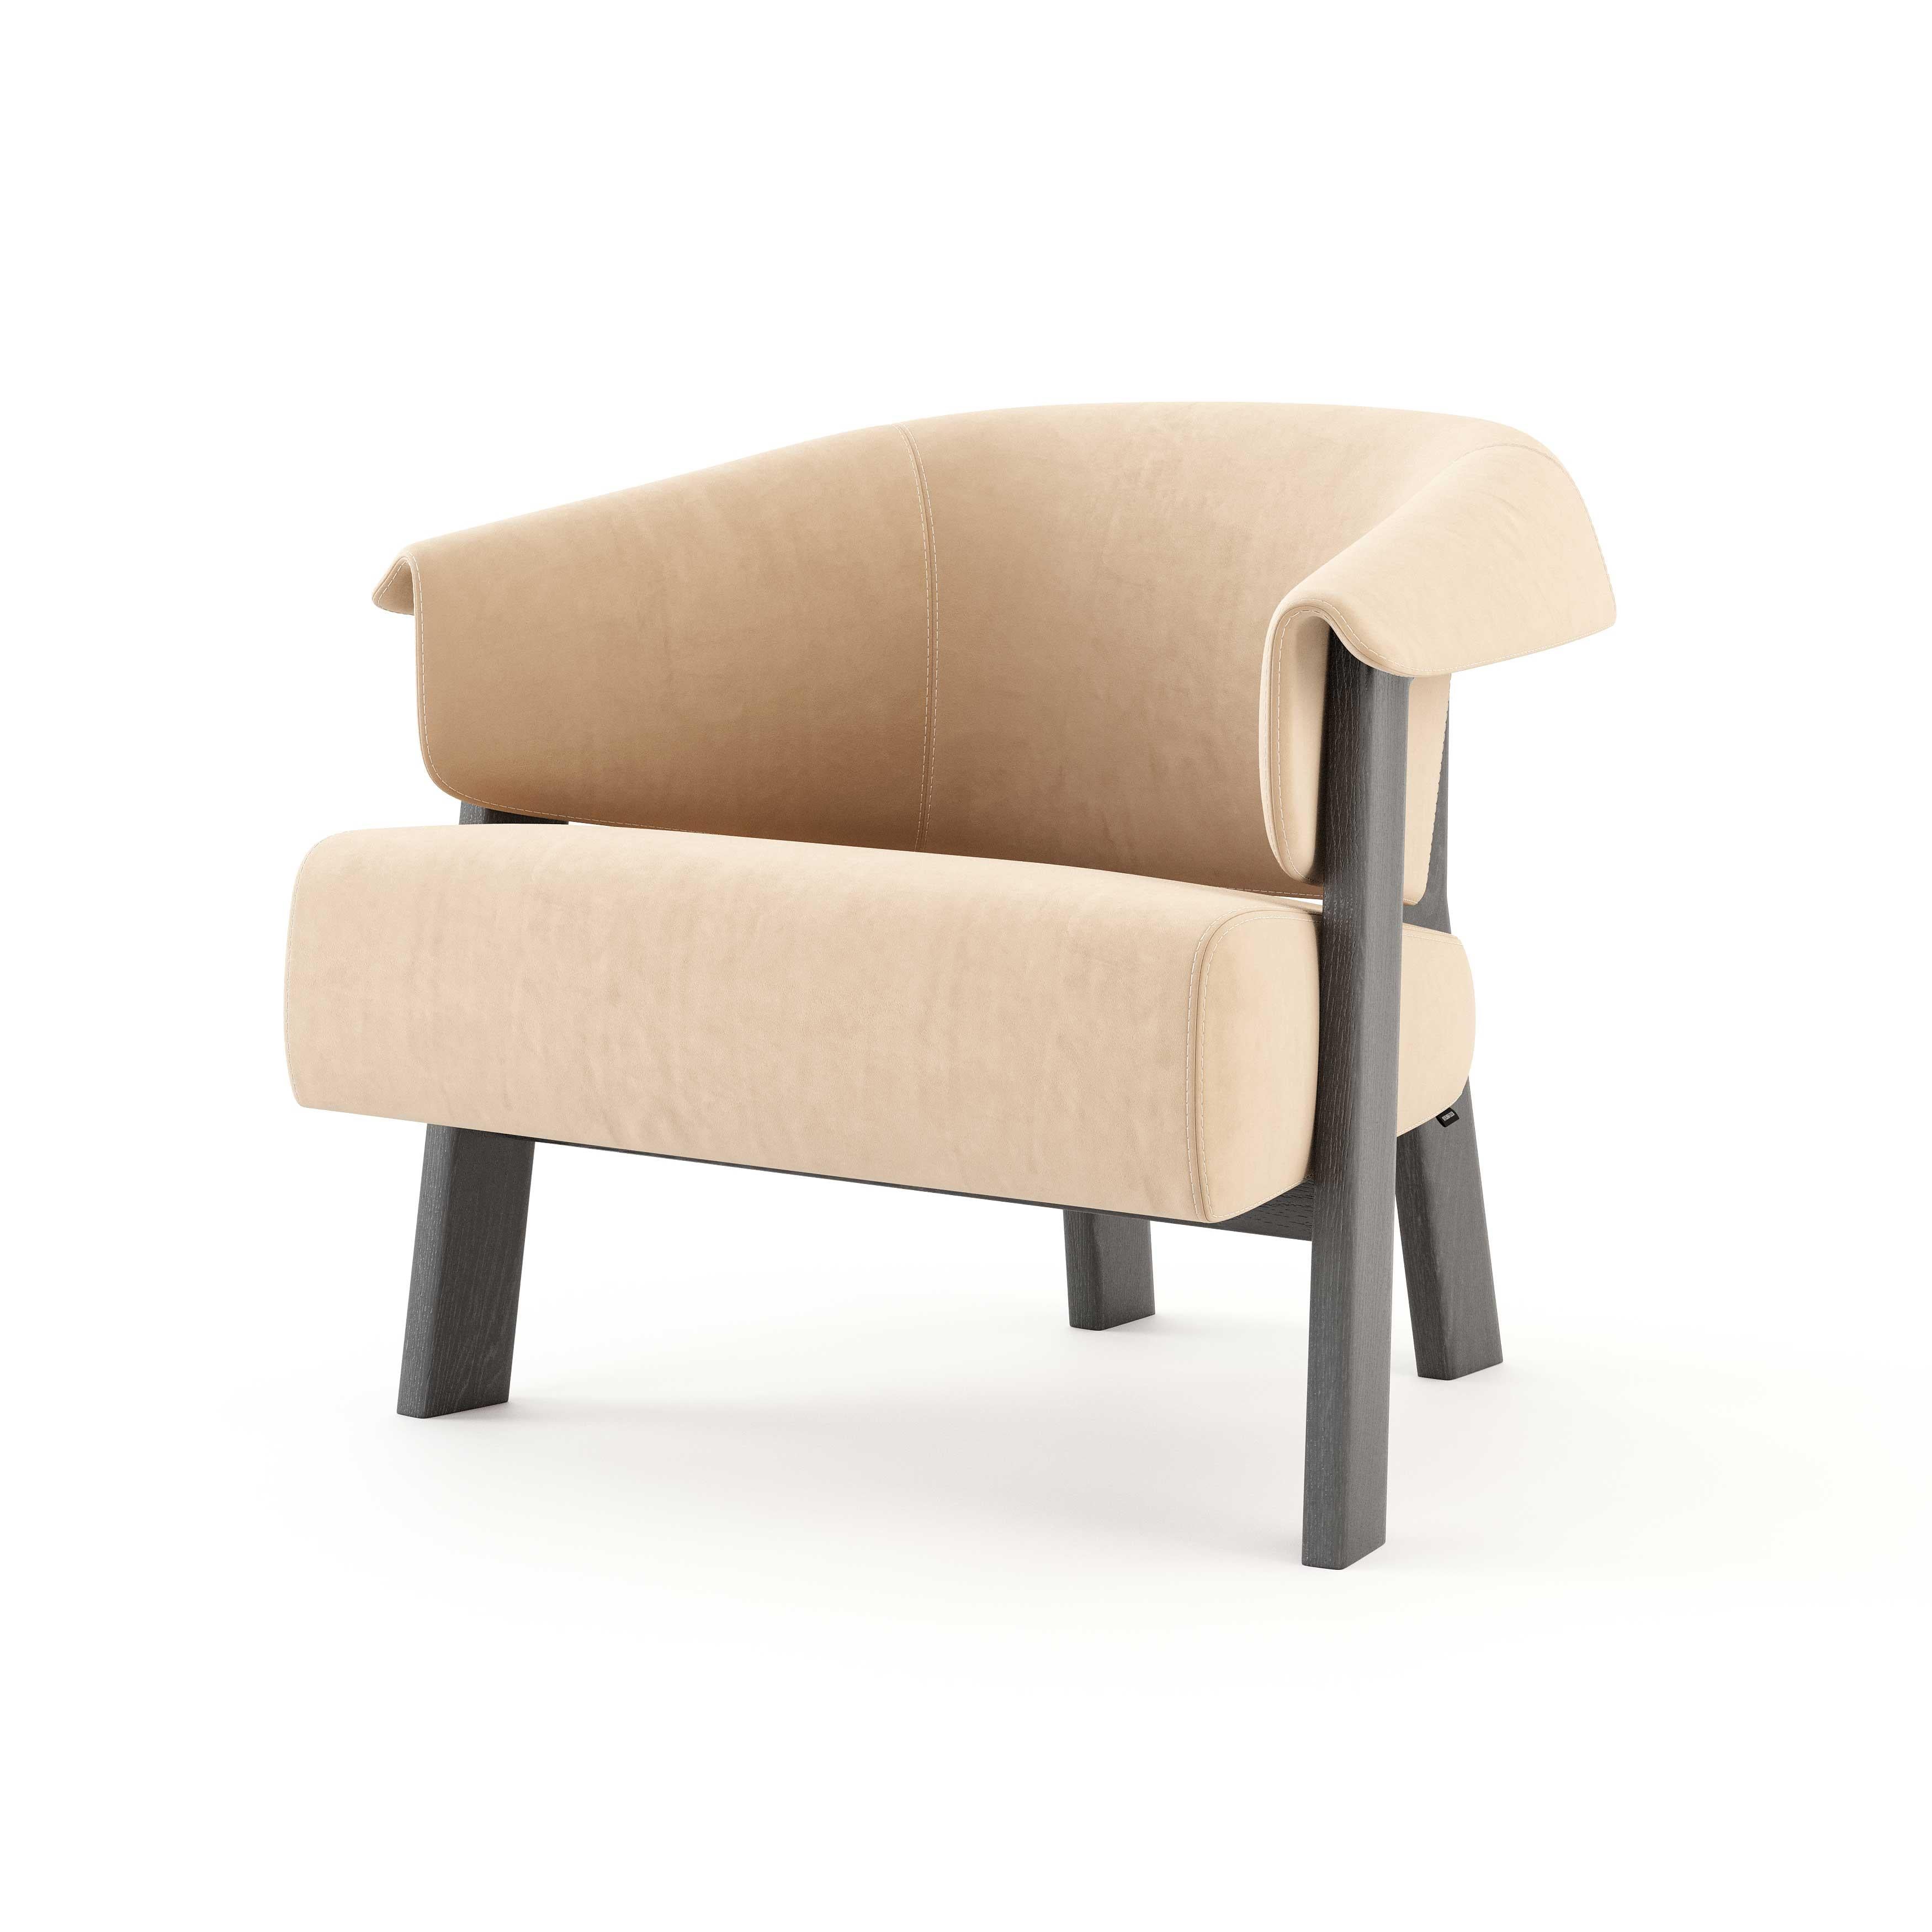 The Toro armchair encourages you to play with the organic, natural, calm influences that reflect the latest trends but simultaneously translate these details into Stylish Club language. A piece of upholstery that catches up with the rush of new